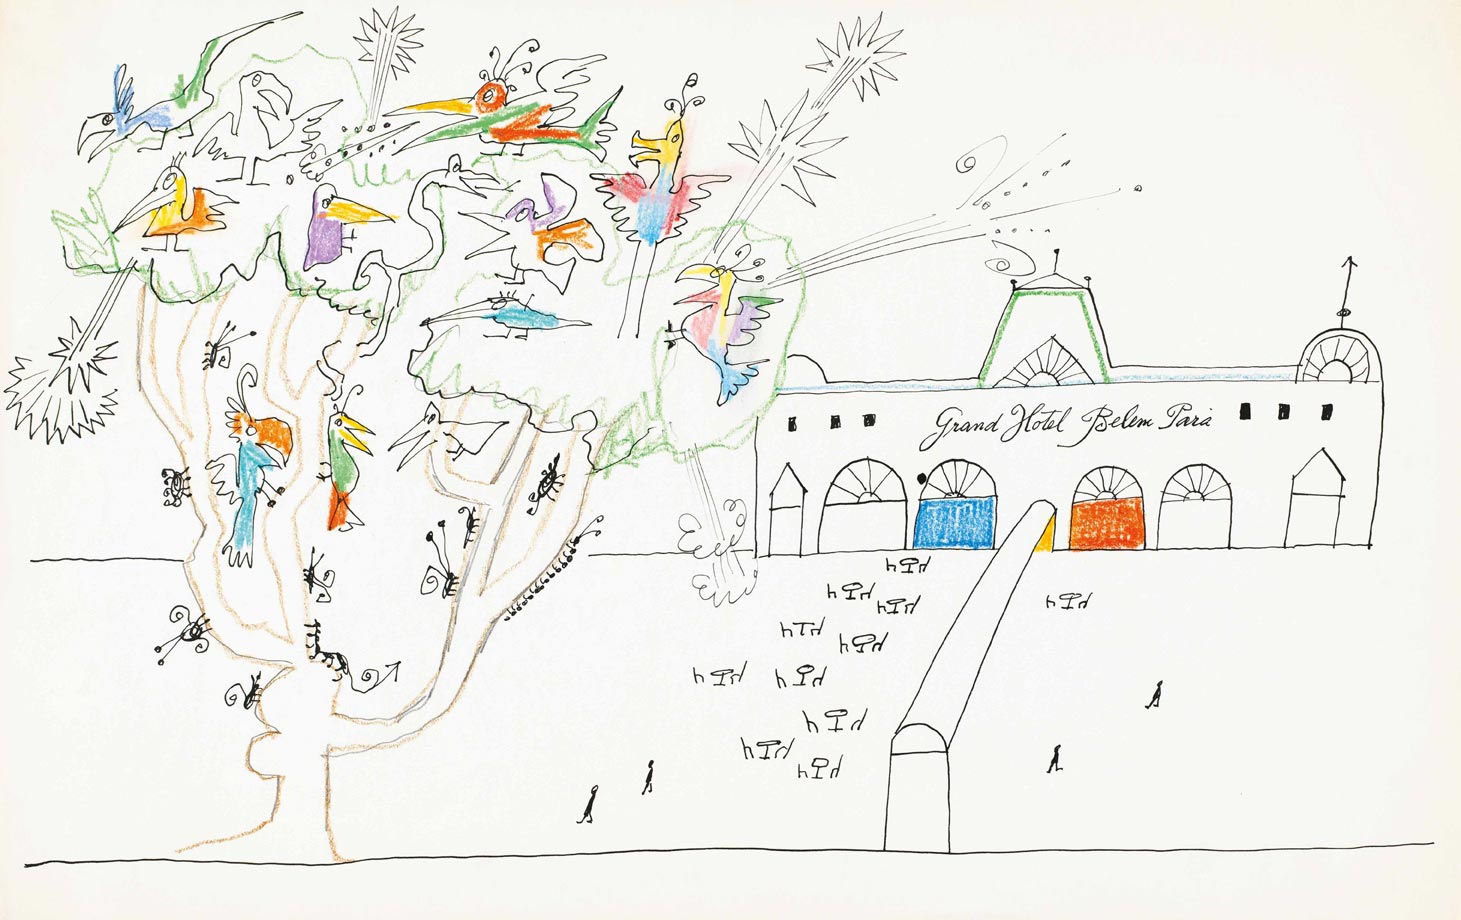 Grand Hotel Belém, 1952. Ink, crayon, and pencil on paper, 14 ½ x 23 in. The Saul Steinberg Foundation.